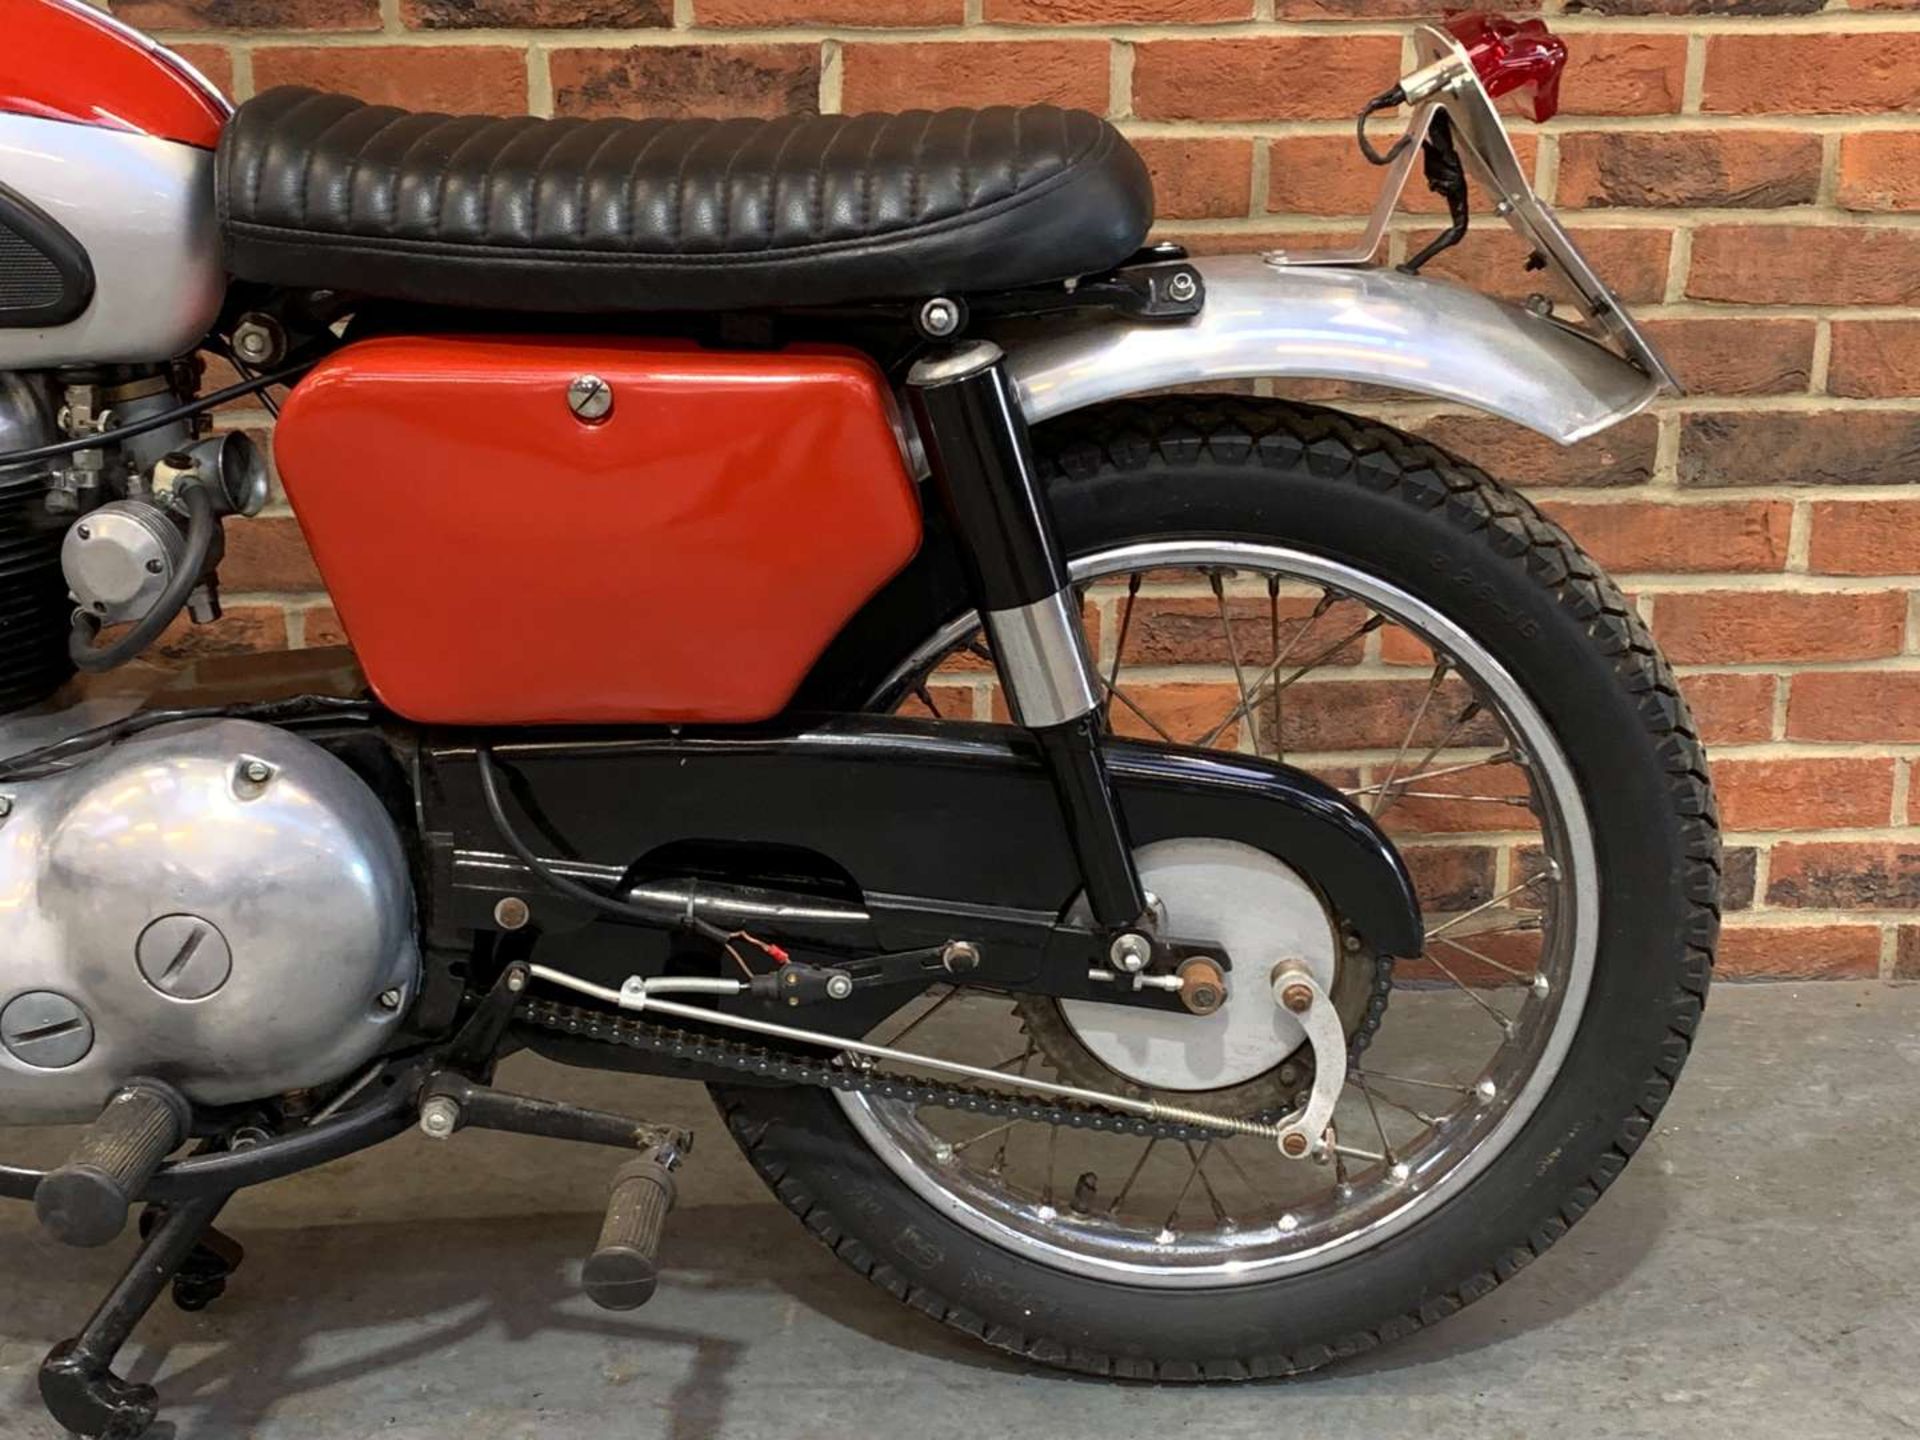 1961 MATCHLESS G2 248CC - Image 9 of 17